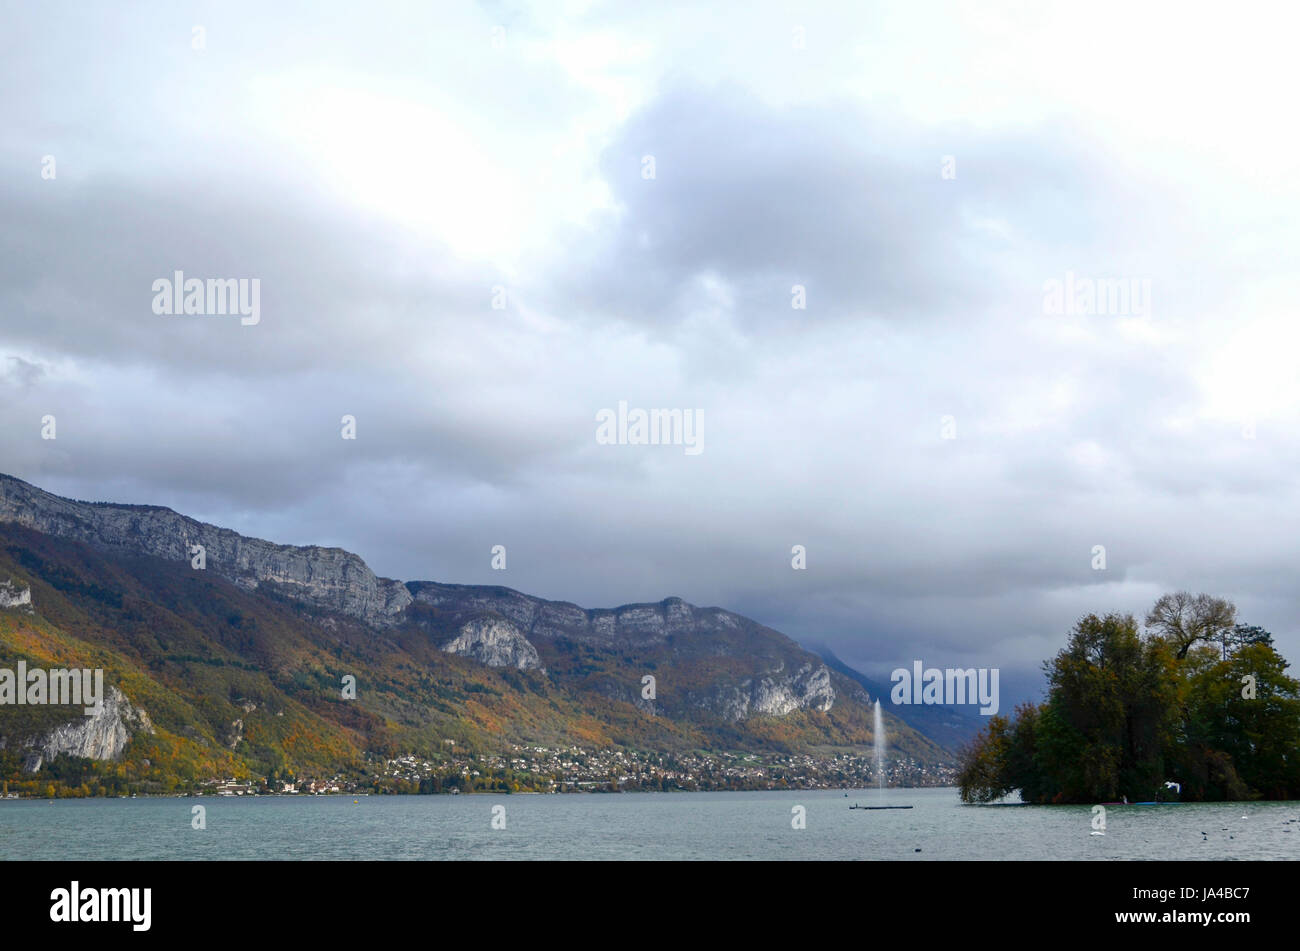 Lake Geneva as seen from department of Haute-Savoie, France Stock Photo